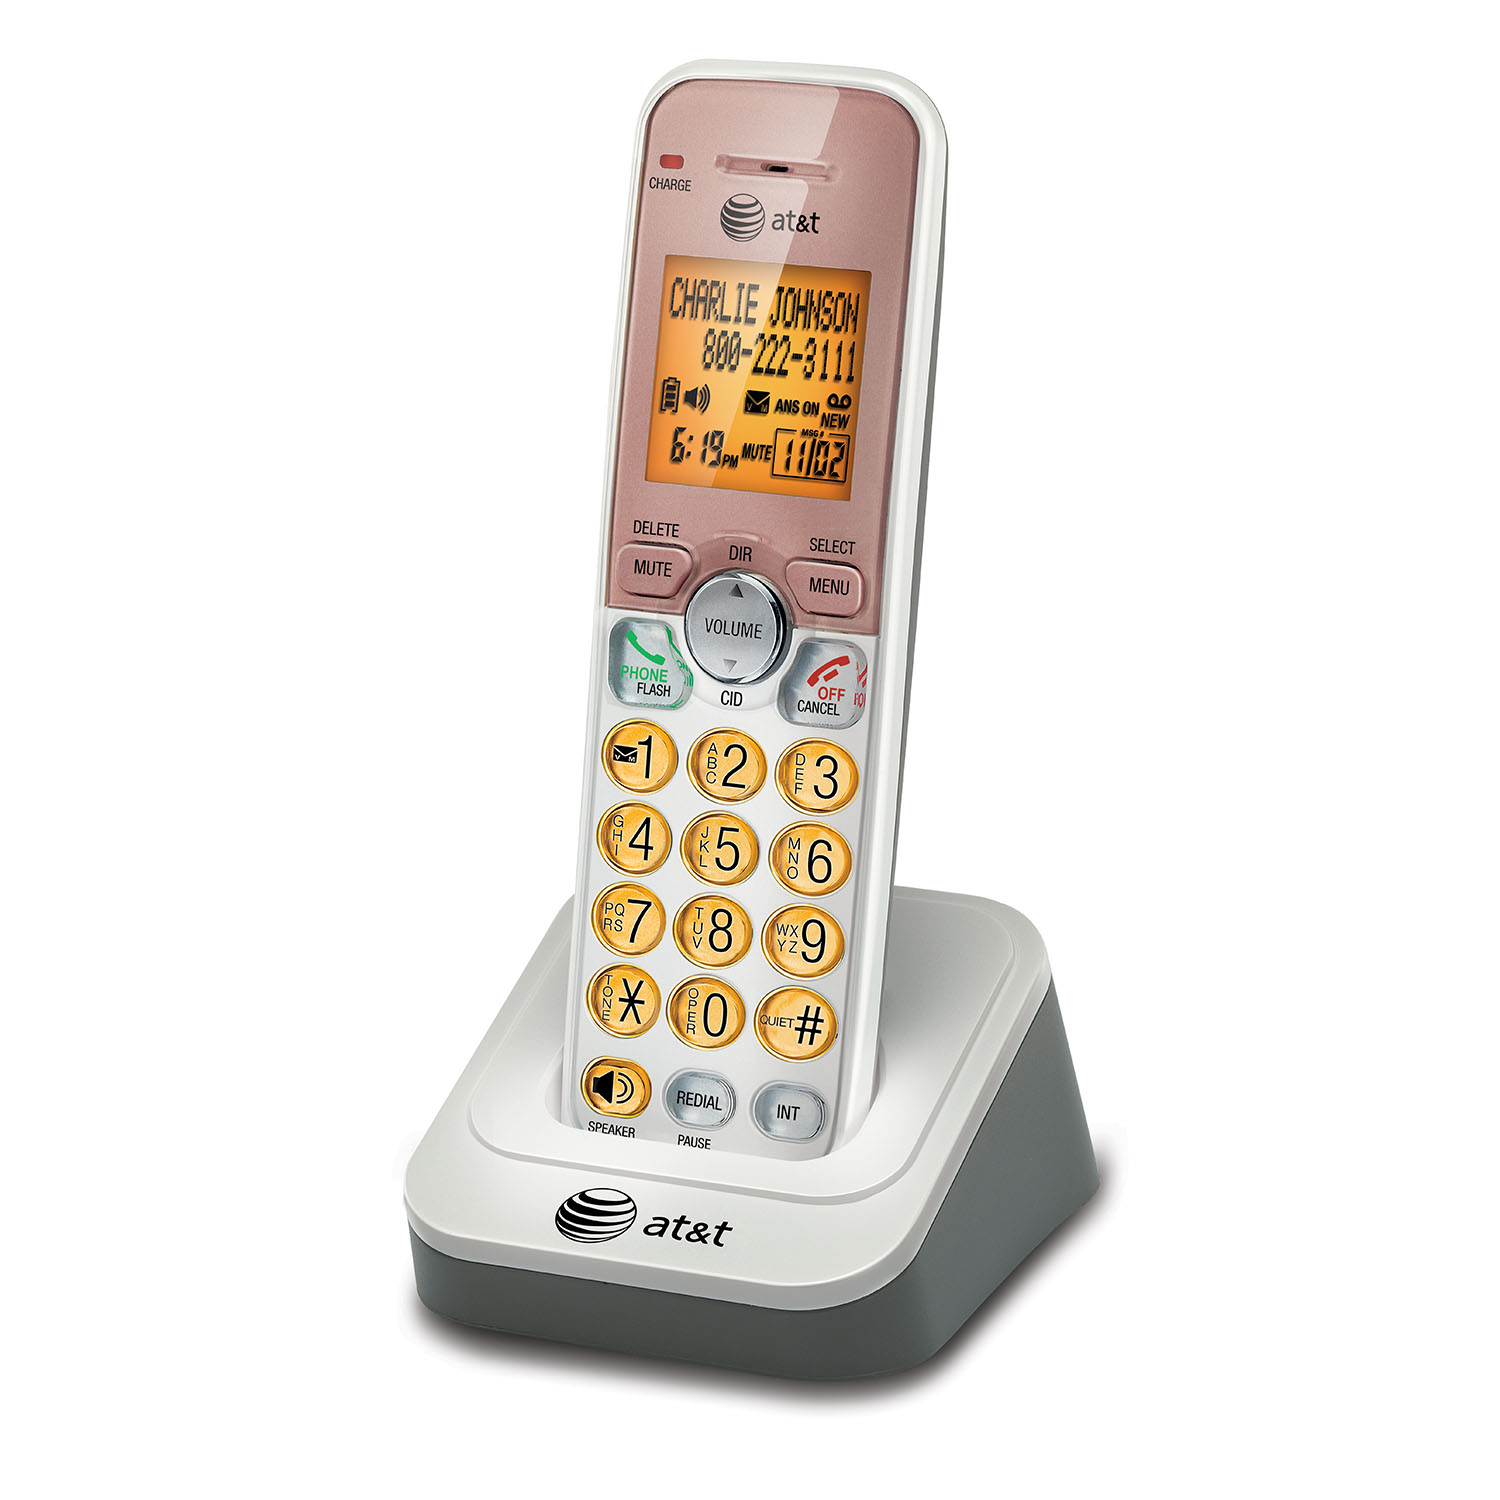 3 handset cordless answering system with caller ID/call waiting - view 7